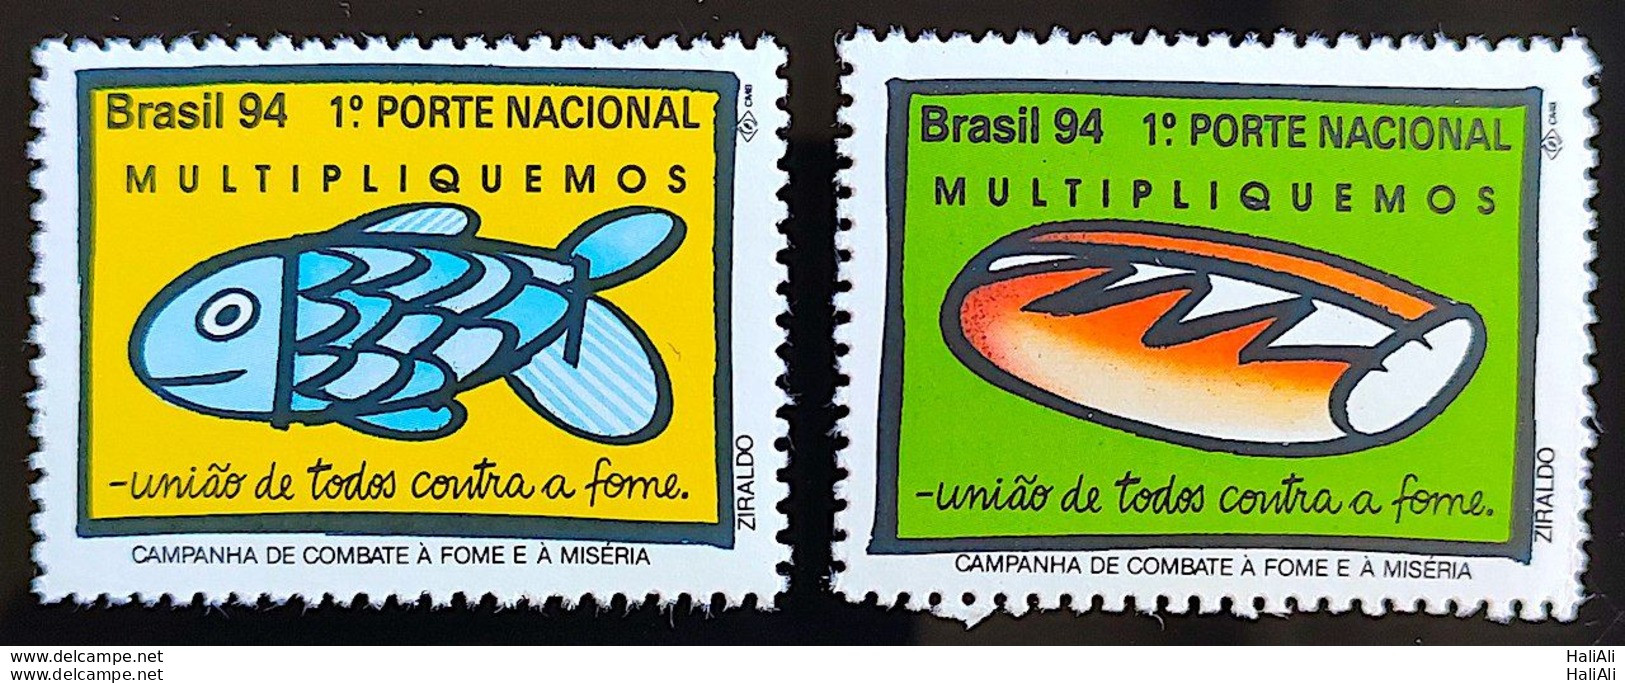 C 1908 Brazil Stamp Campaign To Combat Hunger And Misery Fish Bread 1994 - Unused Stamps